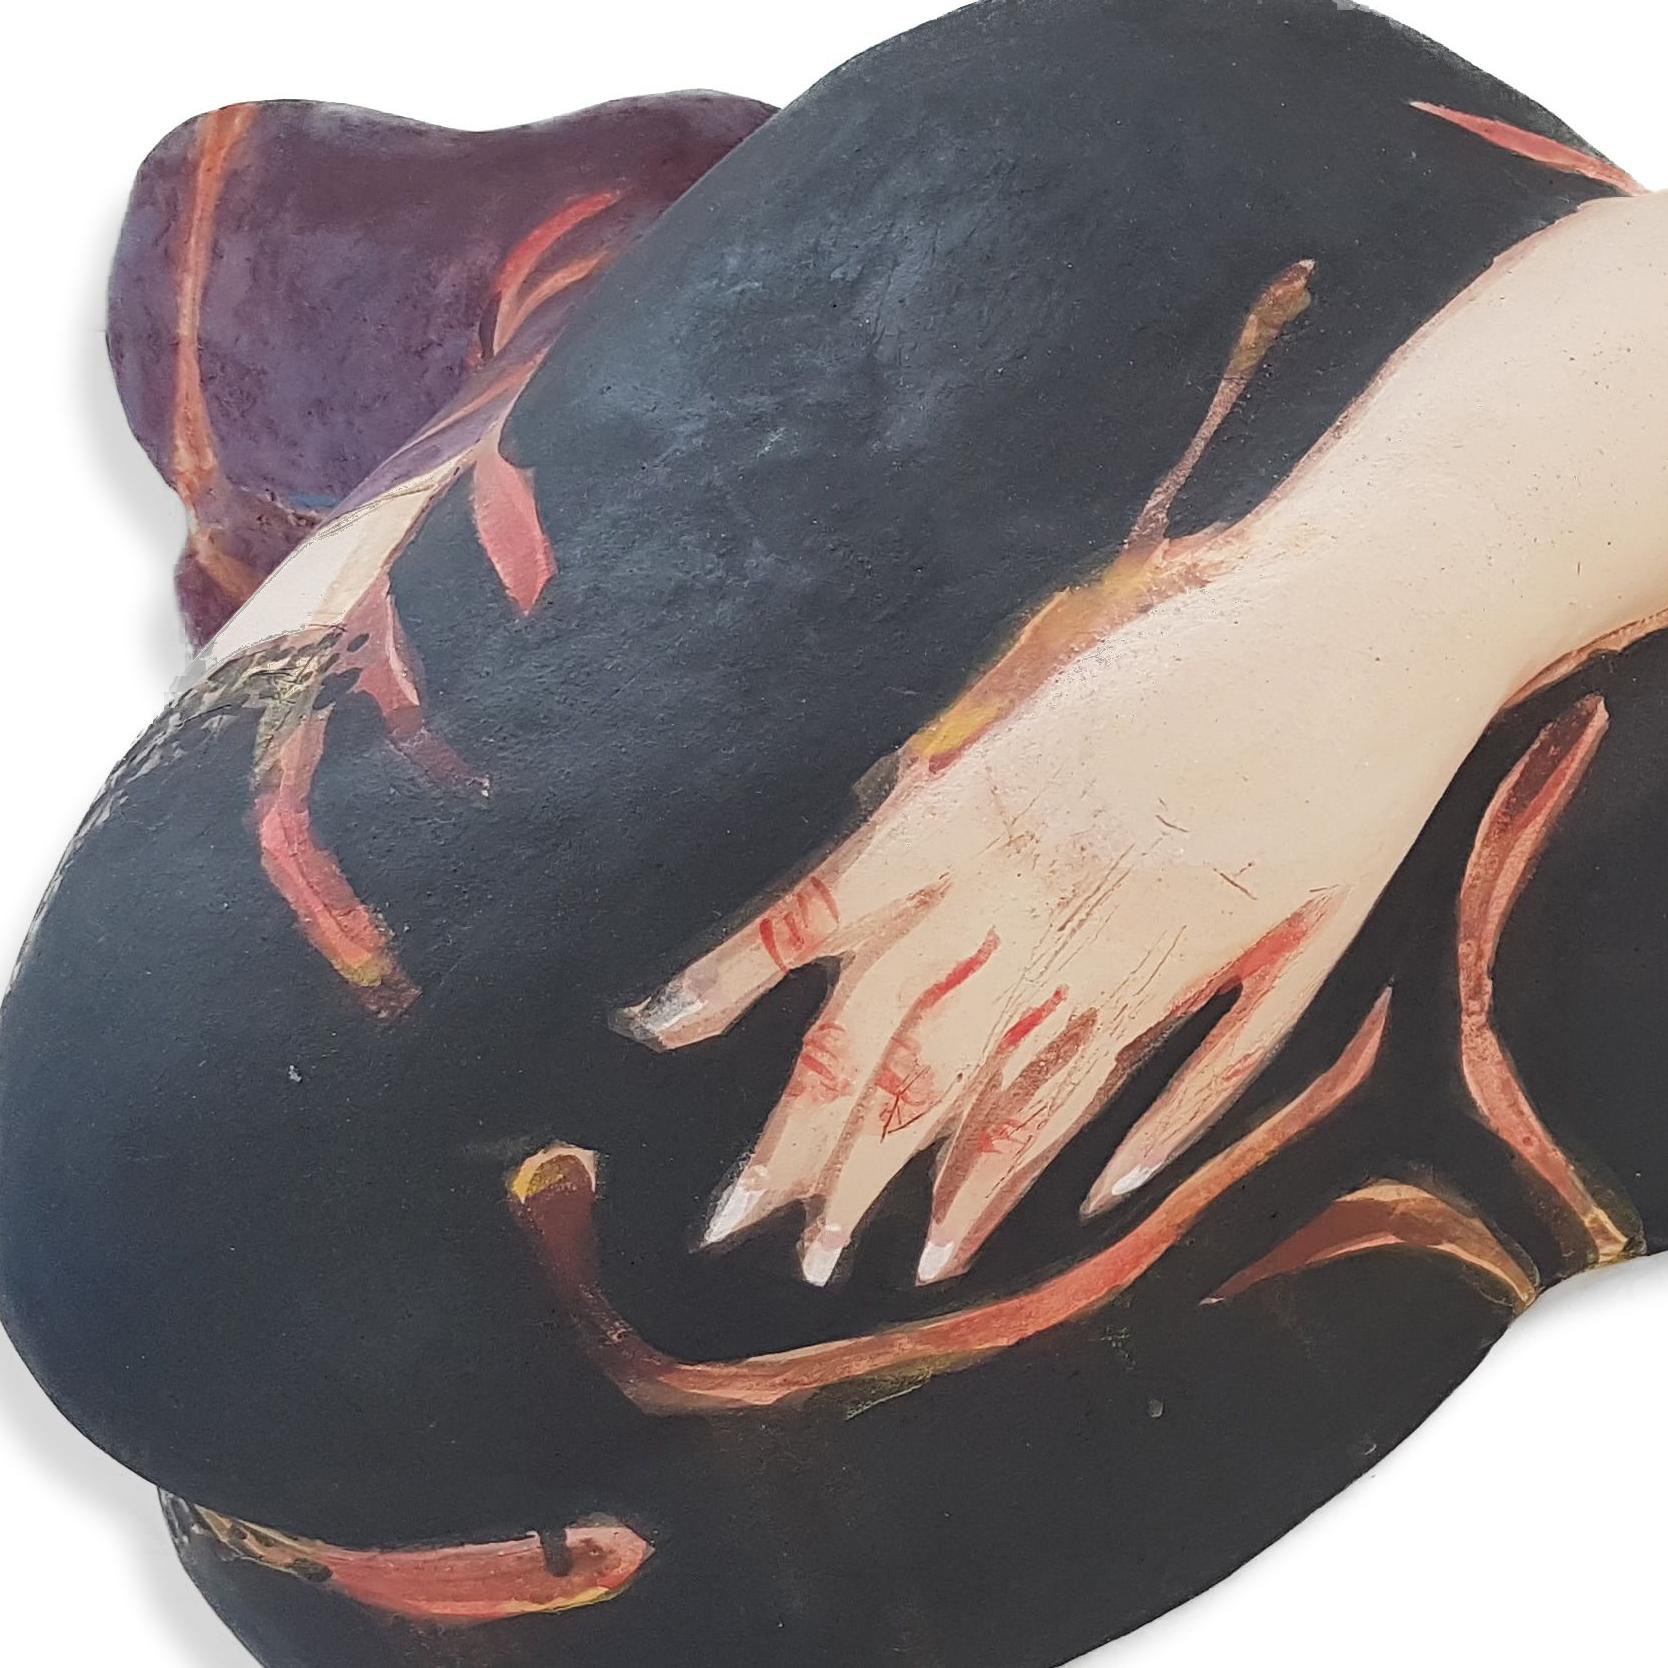 Sleeping Woman in Black Dress with Red Hair - Contemporary Sculpture by Akio Takamori